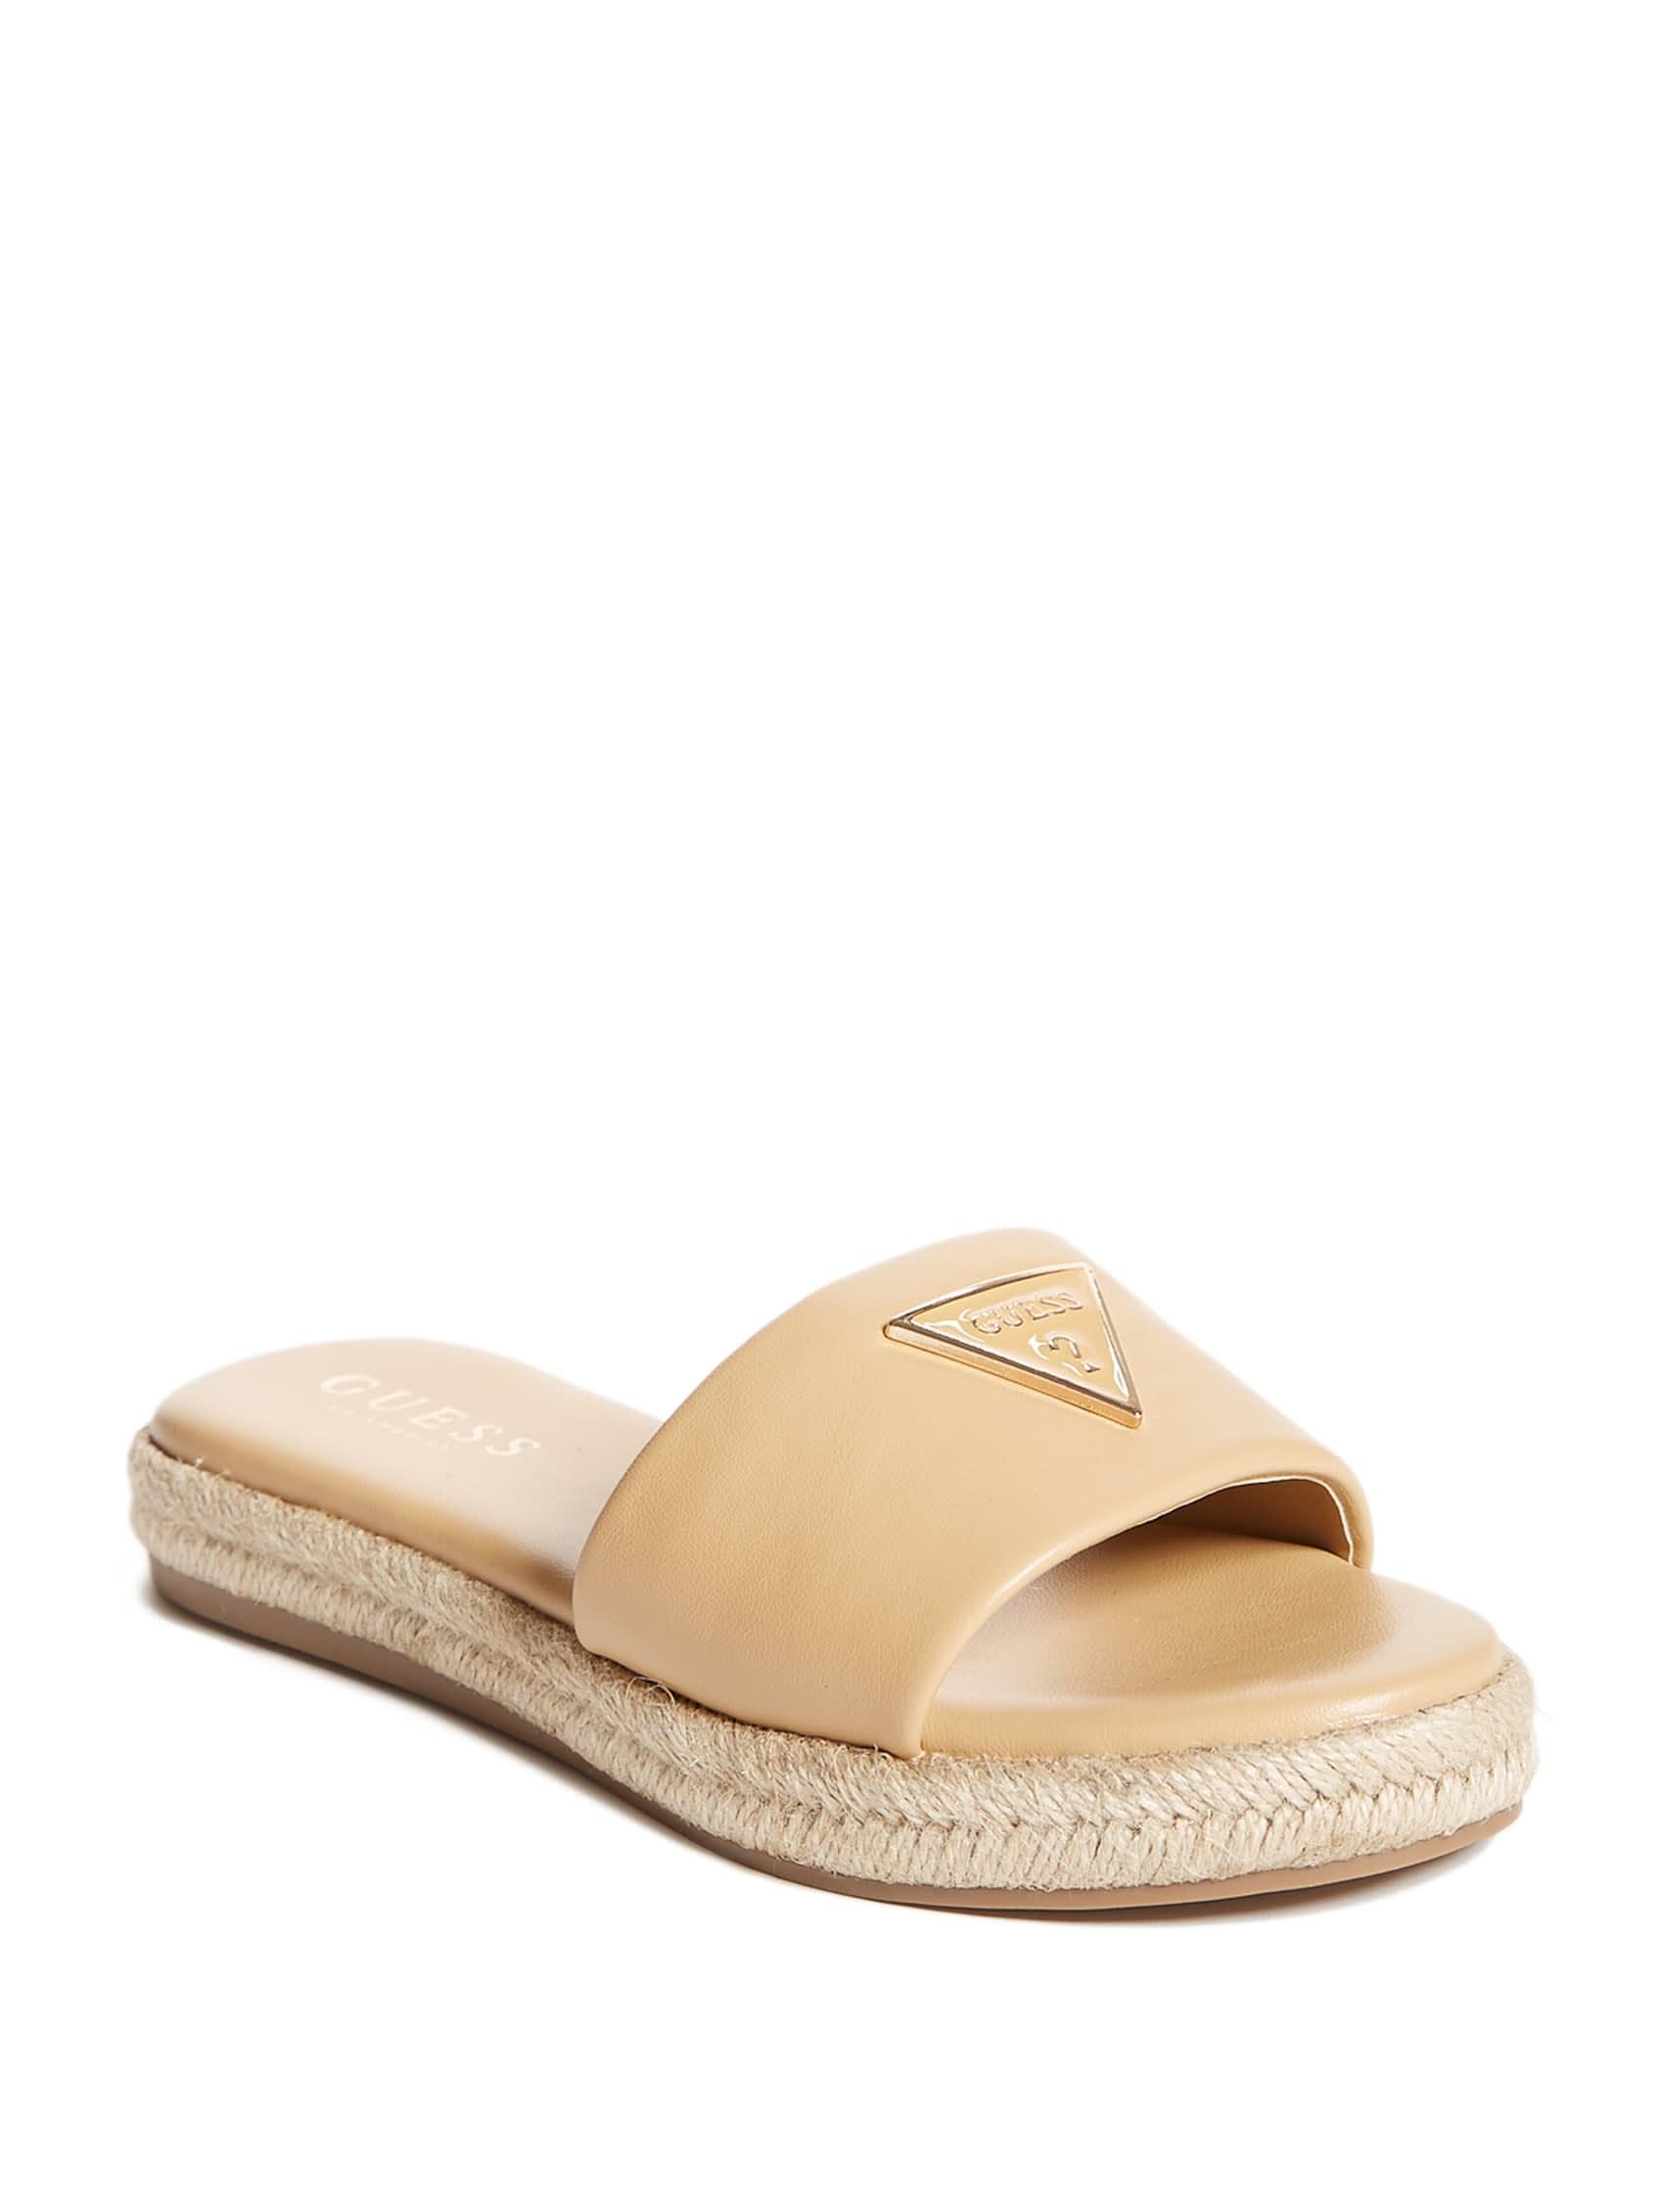 Guess Factory Charli Espadrilles in Natural | Lyst